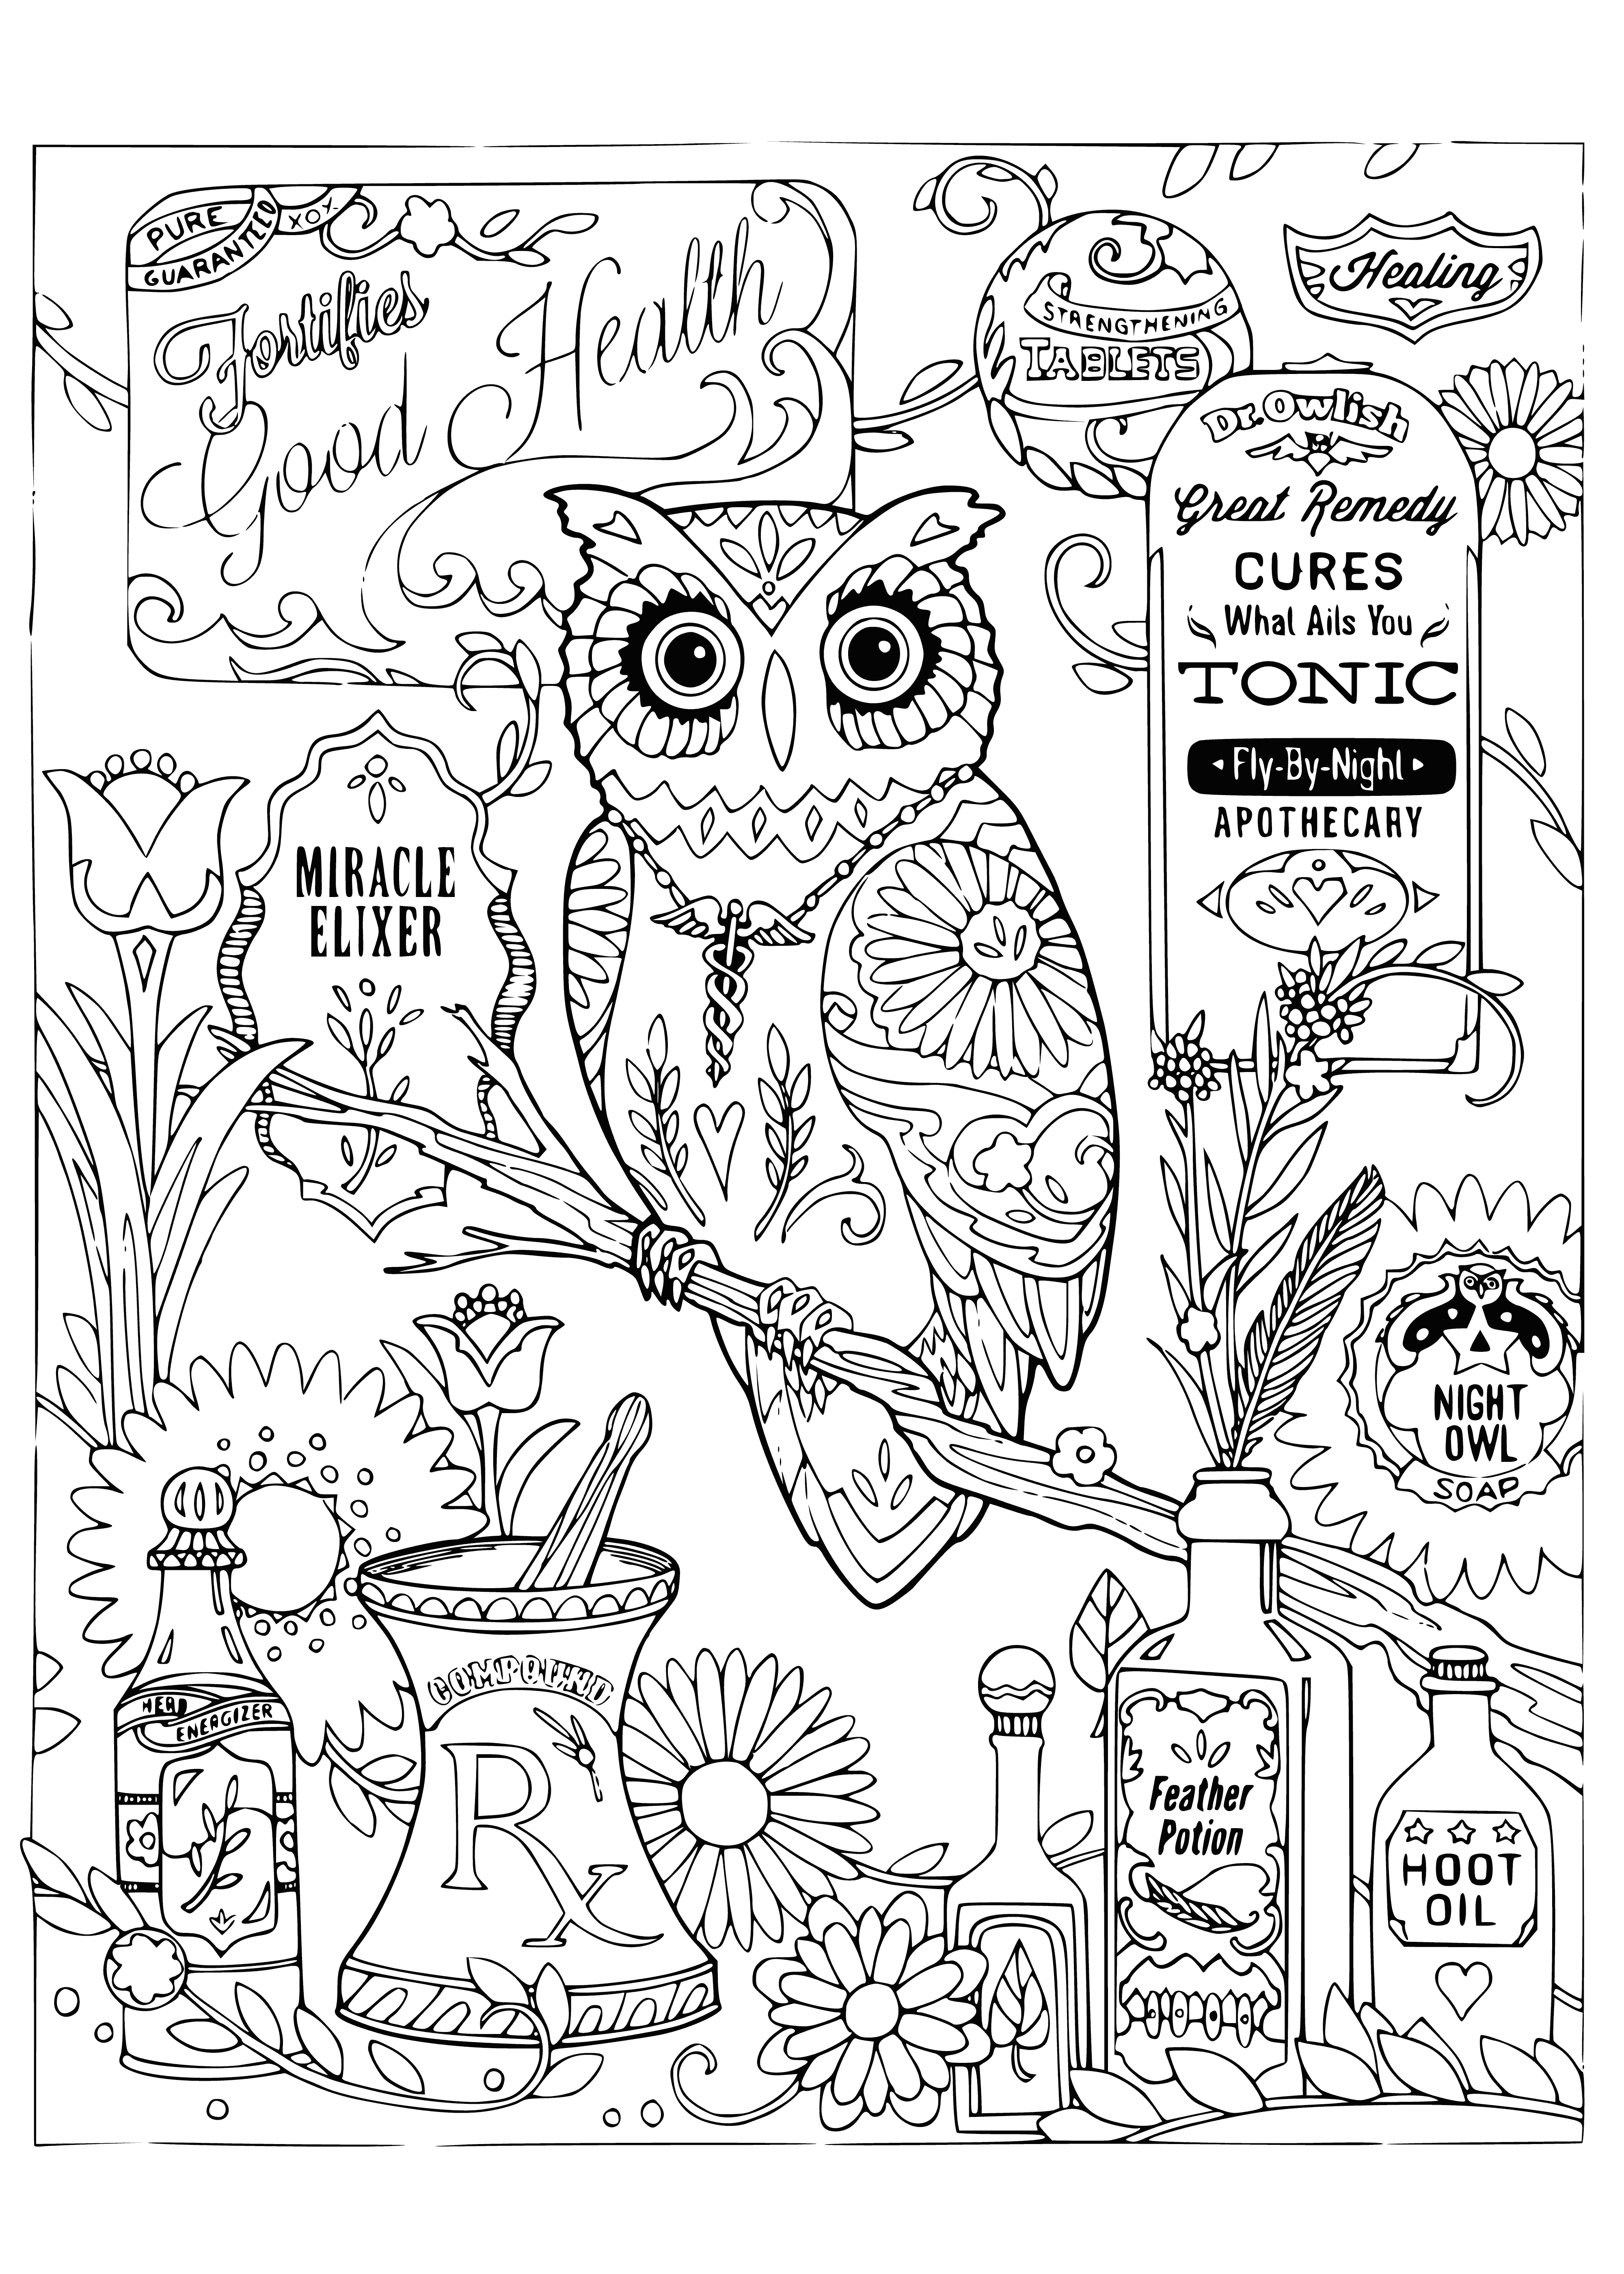 coloring page: Two content owls sitting atop books & mortar/pestle with closed eyes. Soft gradient of blue makes for a calming atmosphere.